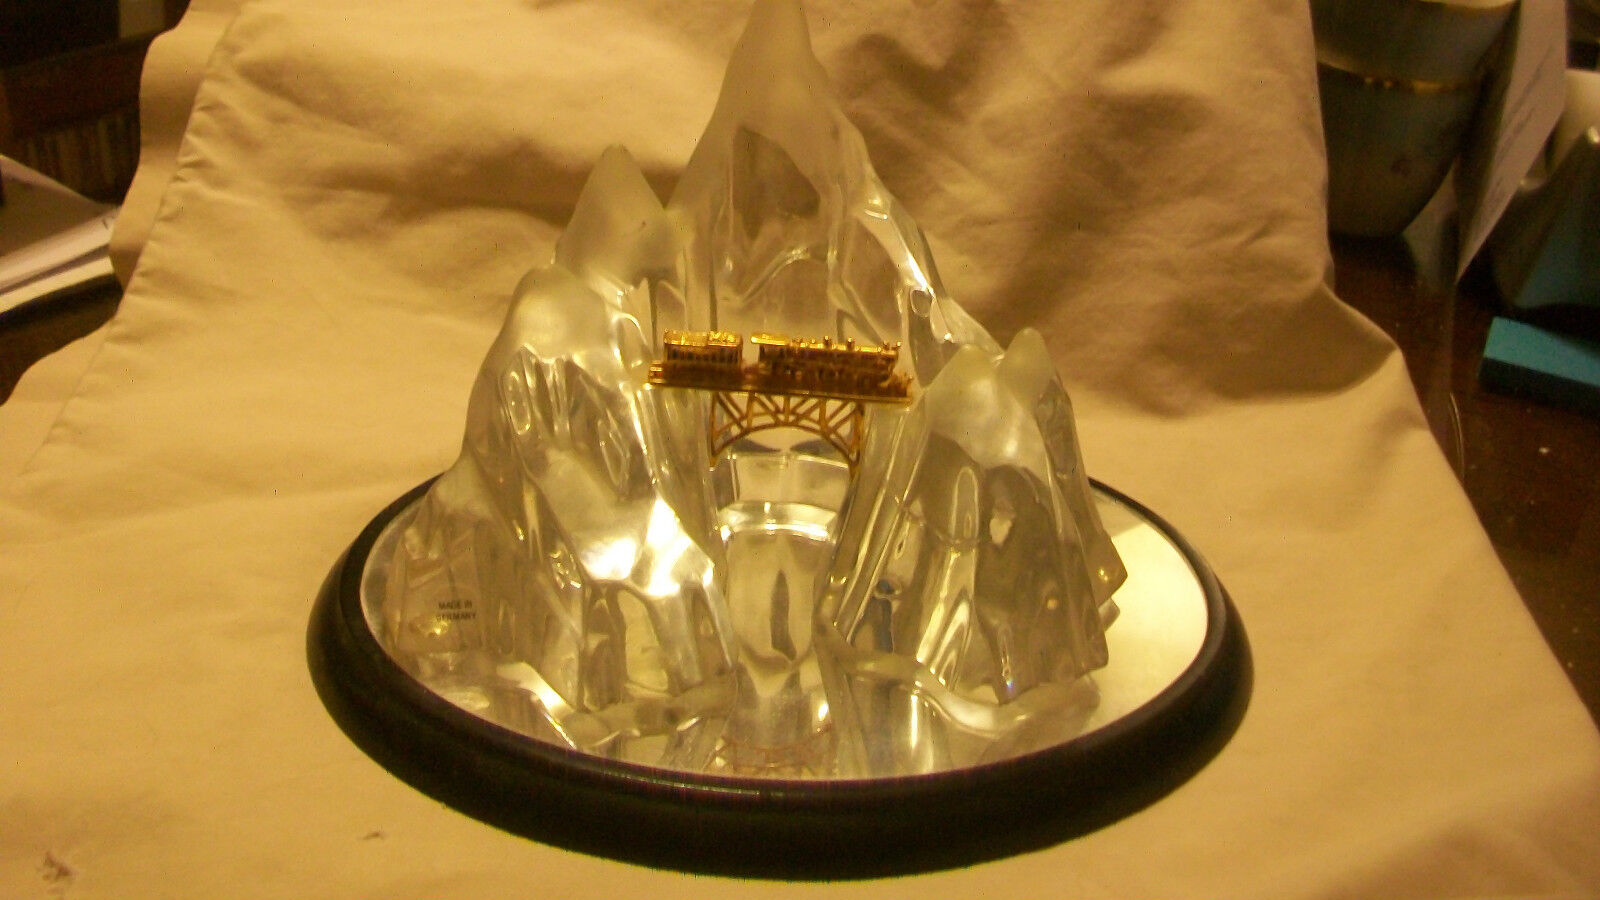 THE GLACIER EXPRESS CRYSTAL FIGURINE WITH GOLD TRAIN IN THE ALPS. FROM GERMANY